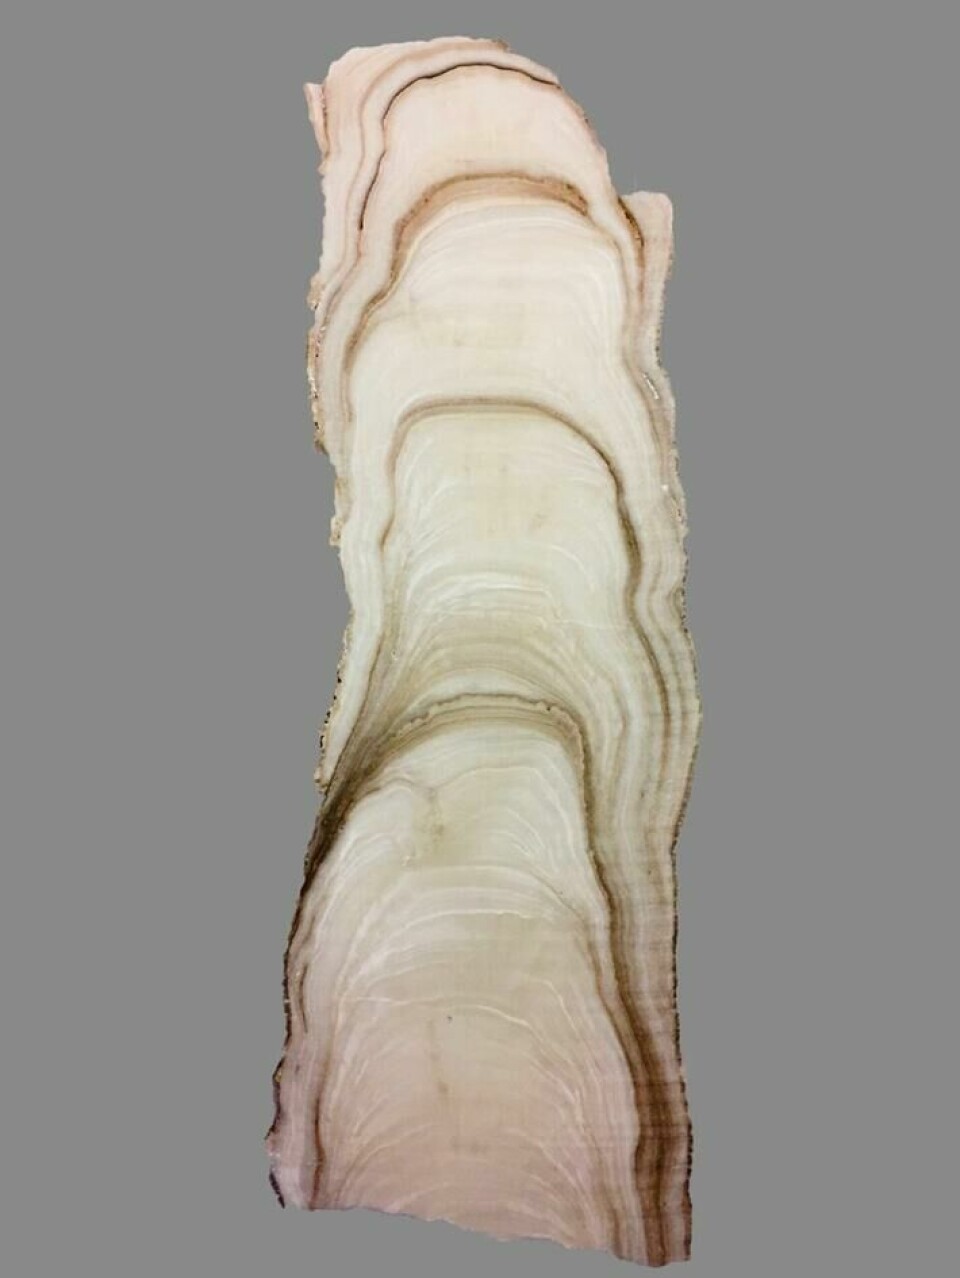 Dripstone cut in two lengthwise, showing the different growth layers.